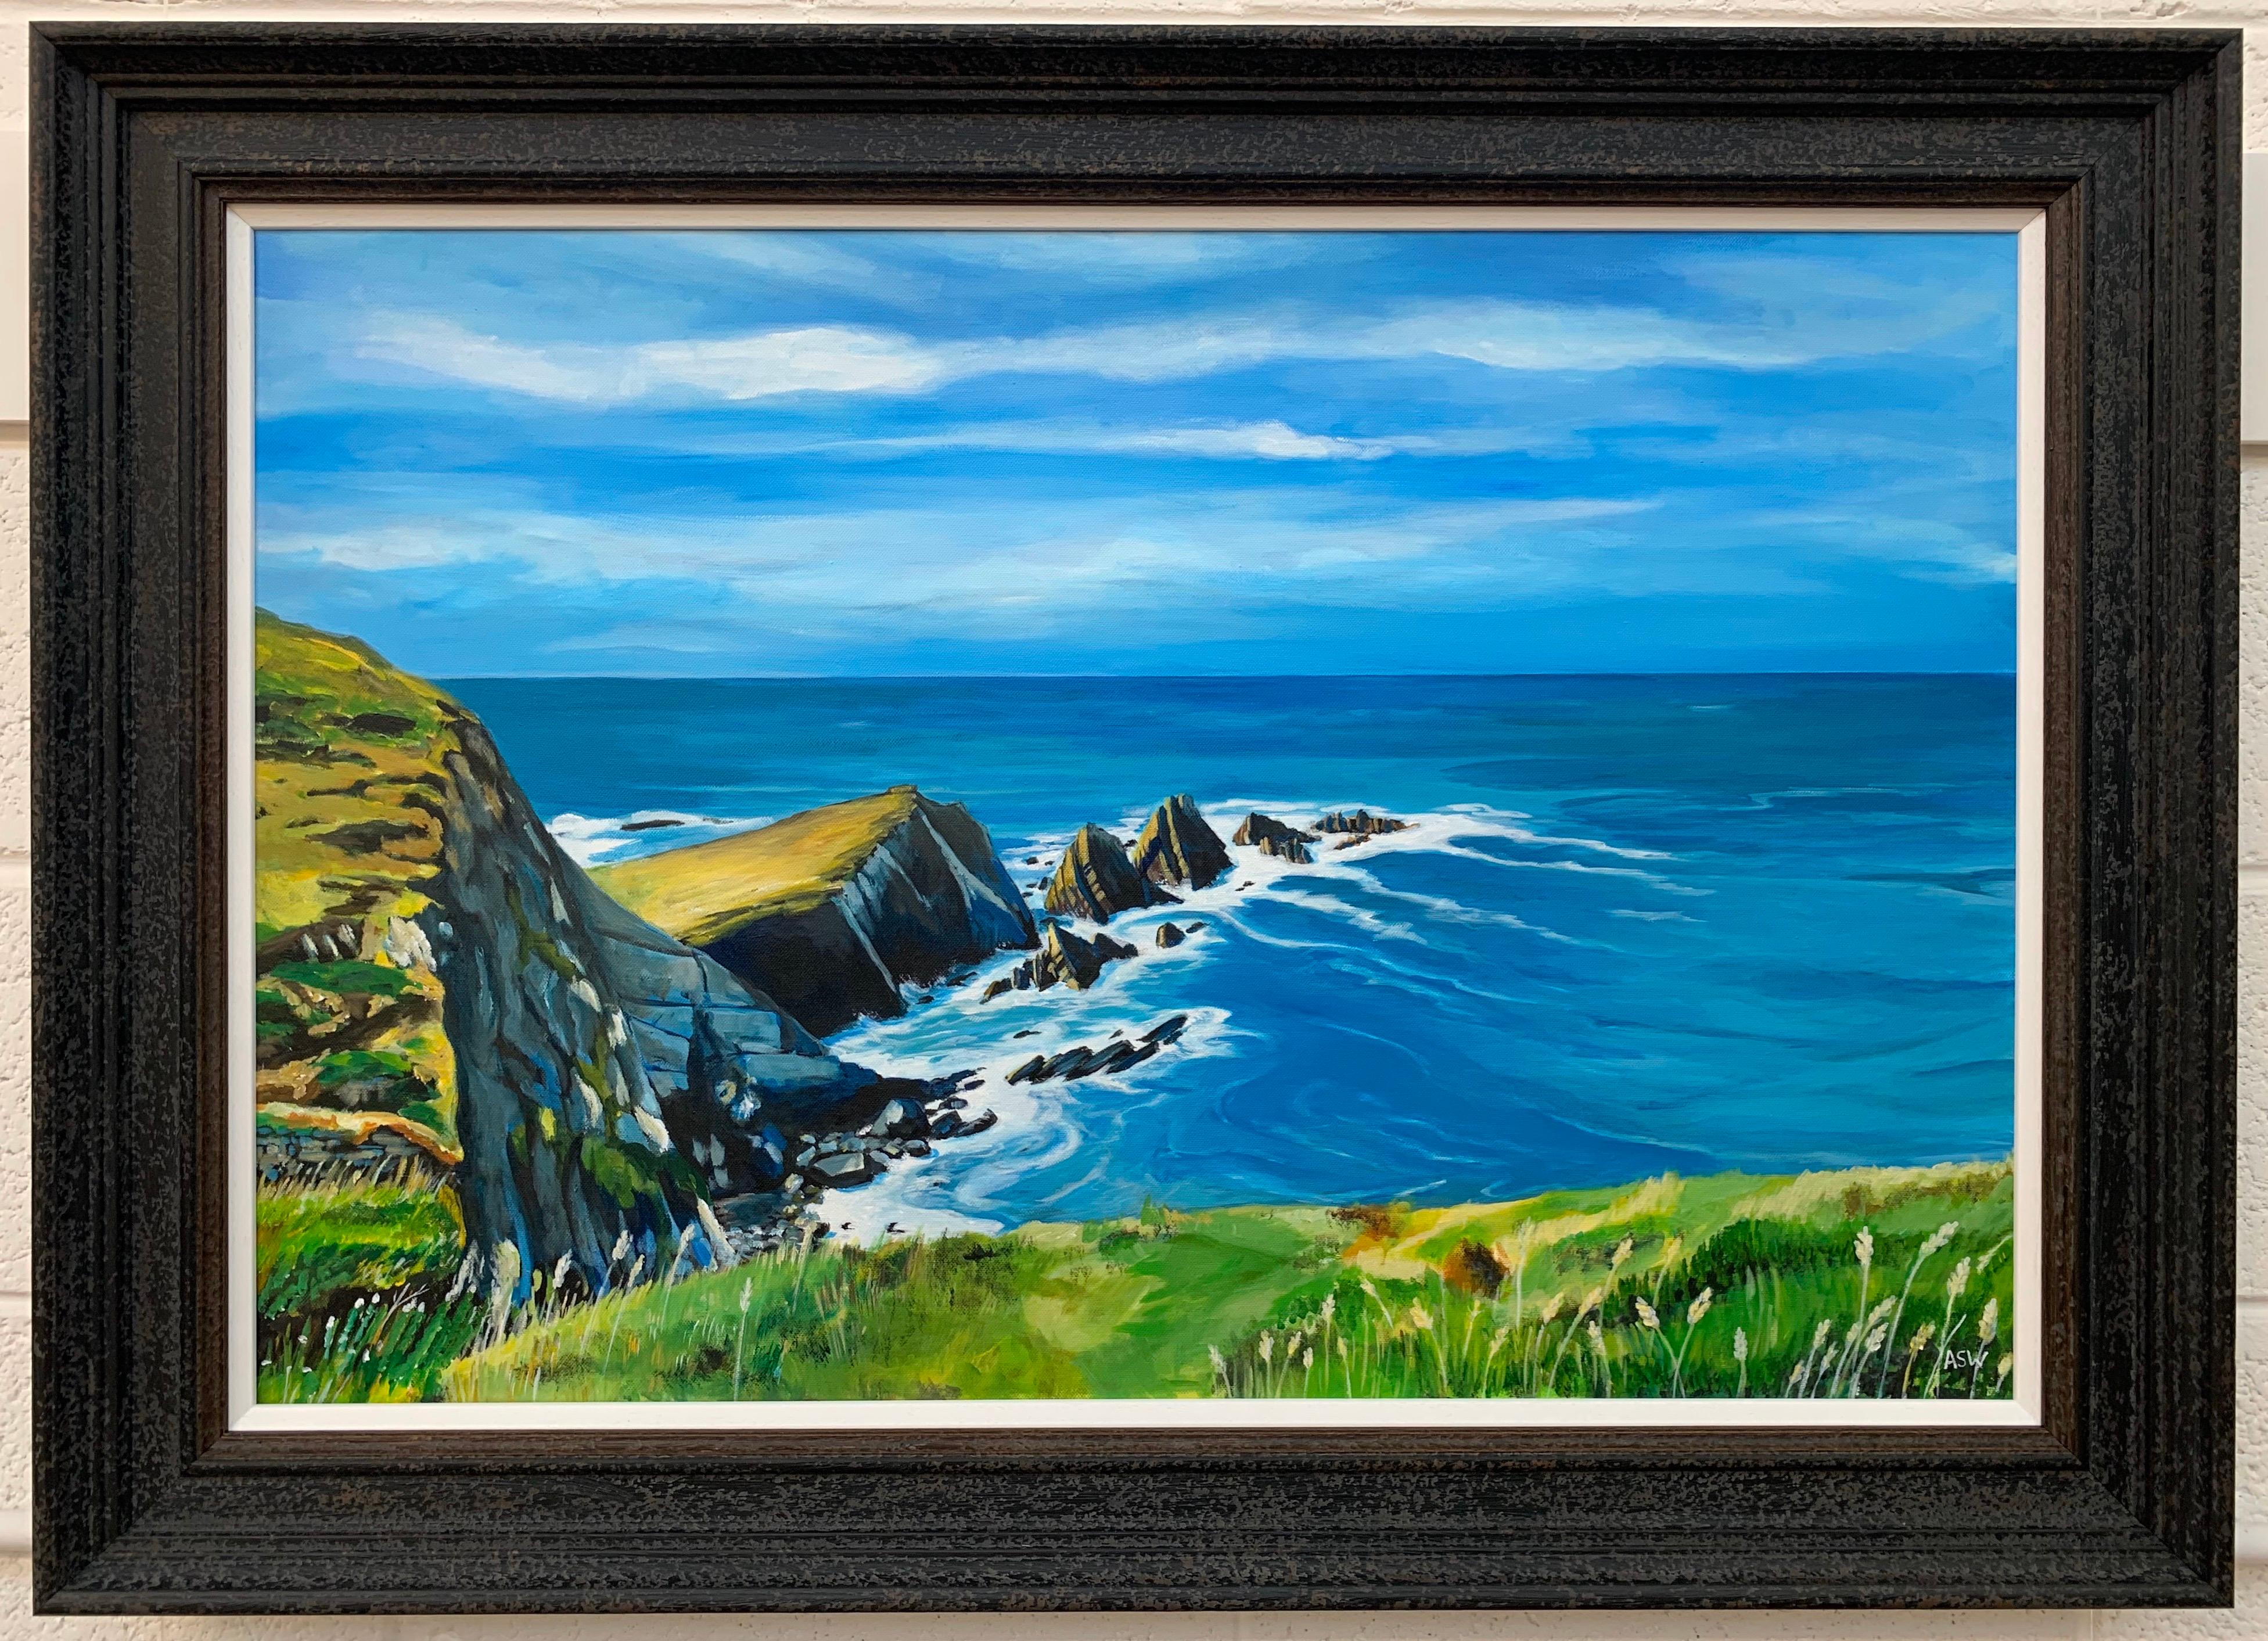 Seascape Landscape Painting of Hartland Point in Devon, England by British Artist Angela Wakefield. Framed in a high quality contemporary off-black wooden moulding with a white slip. 

Art measures 35.5 x 23.5 inches
Frame measures 42 x 30 inches